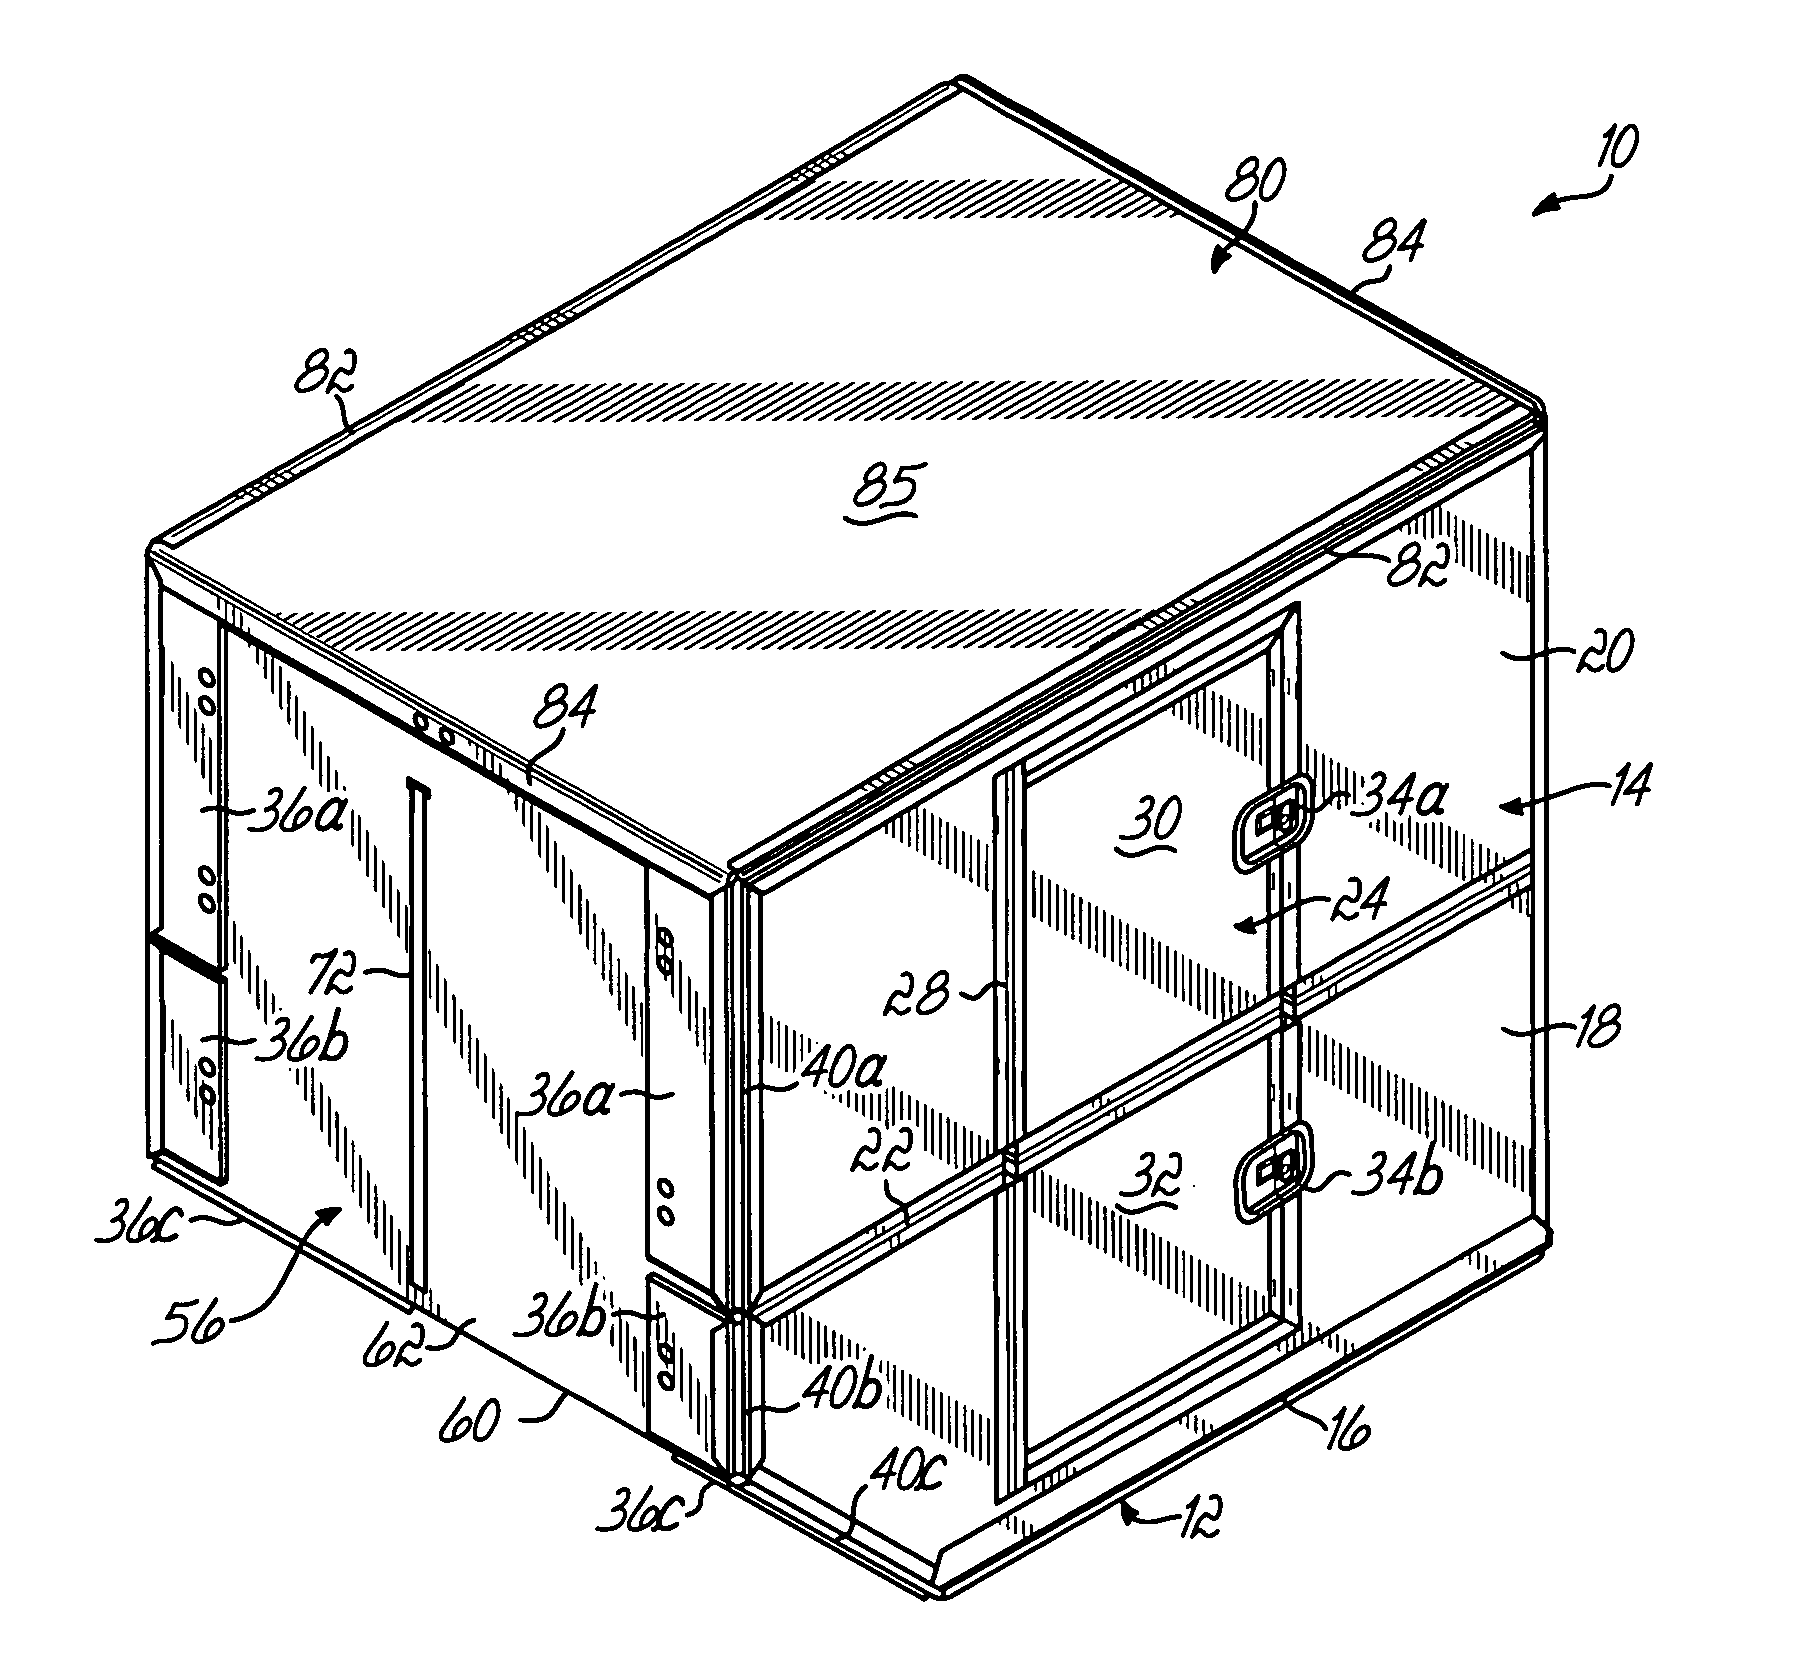 Collapsible container for air shipment cargo and method of use